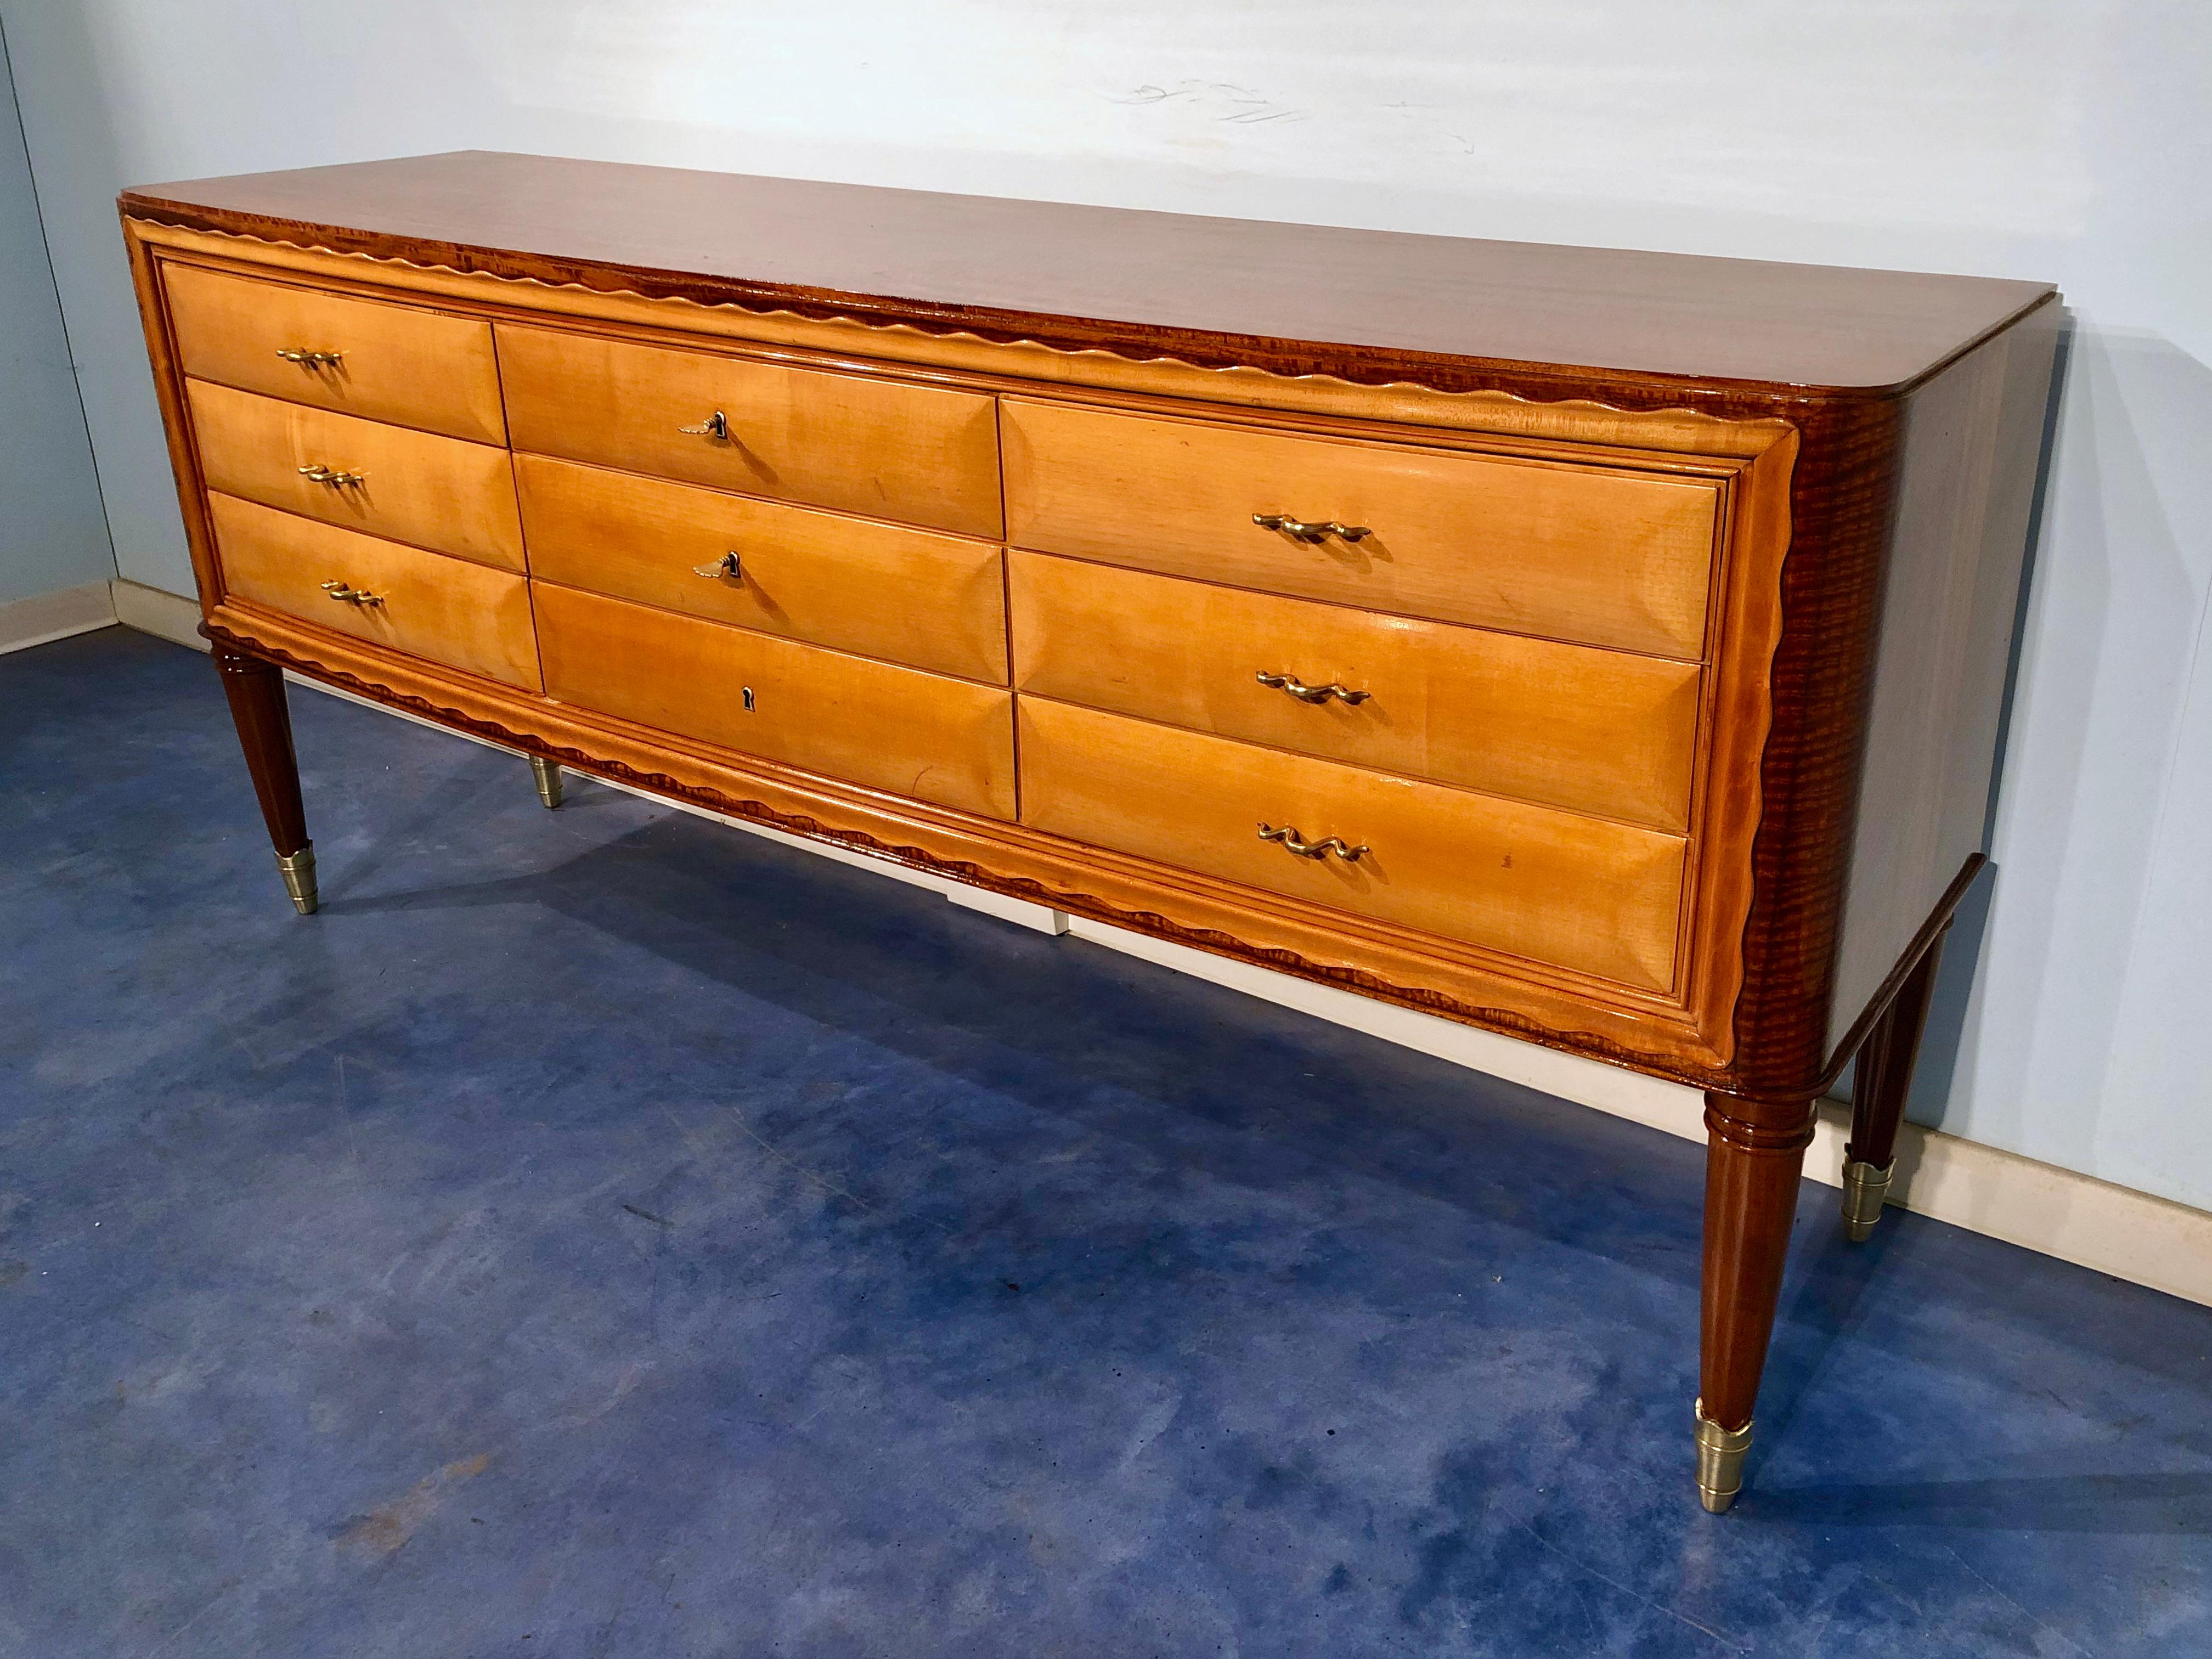 Italian Midcentury Sideboard or Chest of Drawers by Paolo Buffa, 1950s For Sale 8